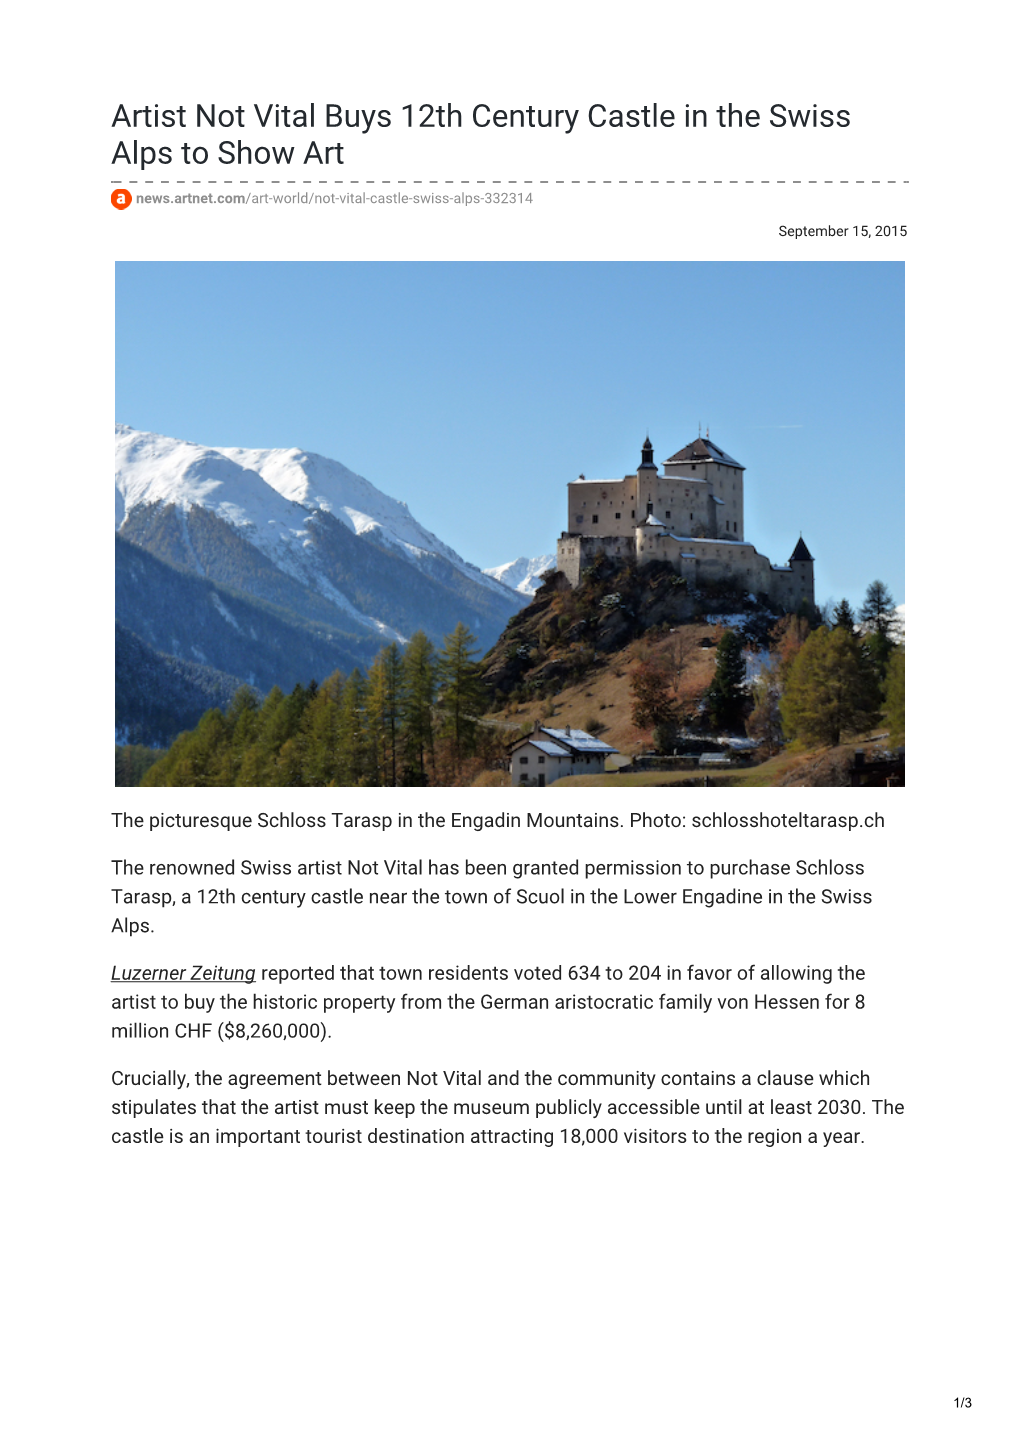 Artist Not Vital Buys 12Th Century Castle in the Swiss Alps to Show Art